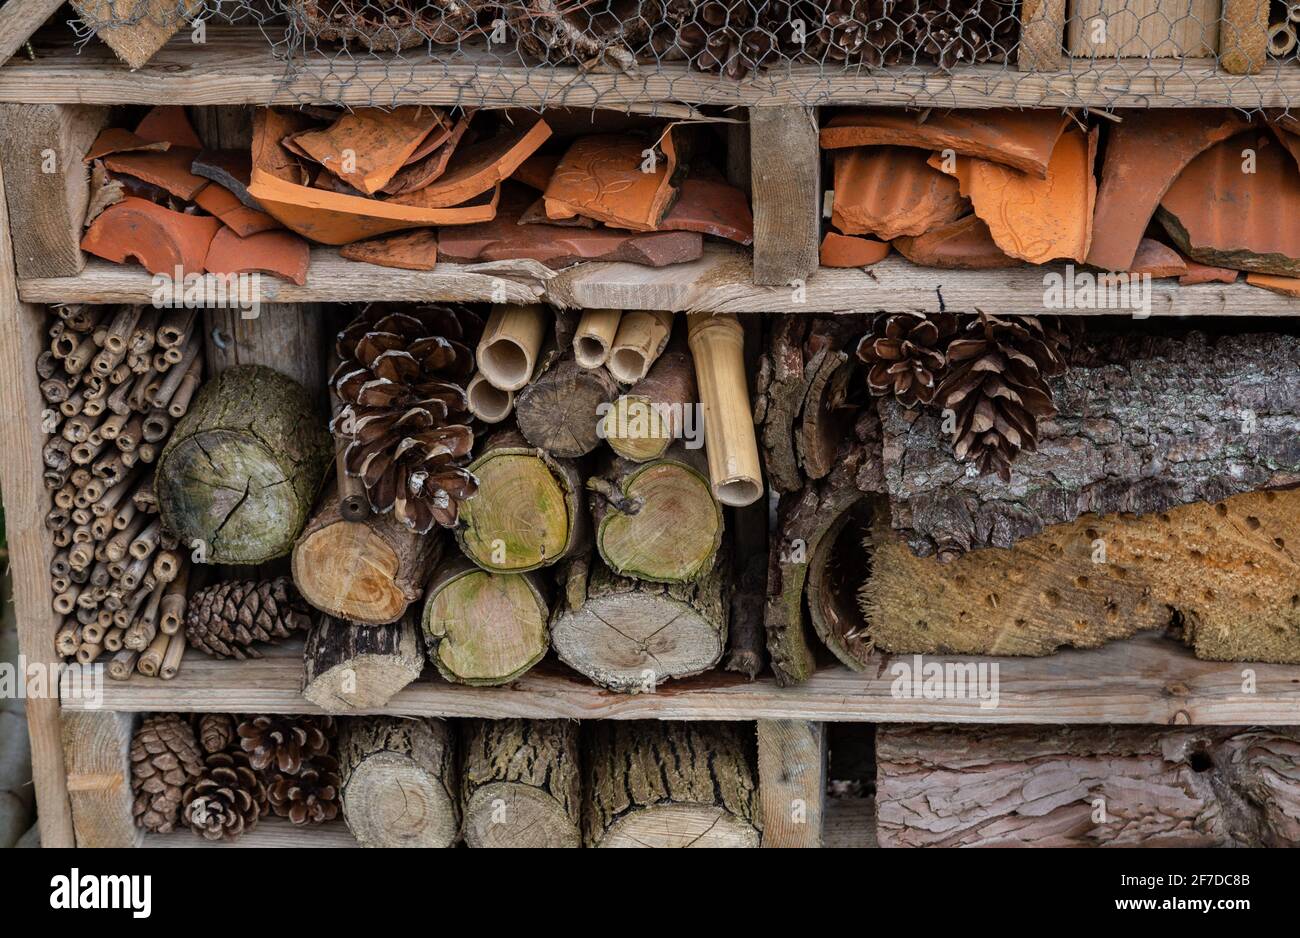 An insect house built to provide homes for bugs and mini beasts. Stock Photo